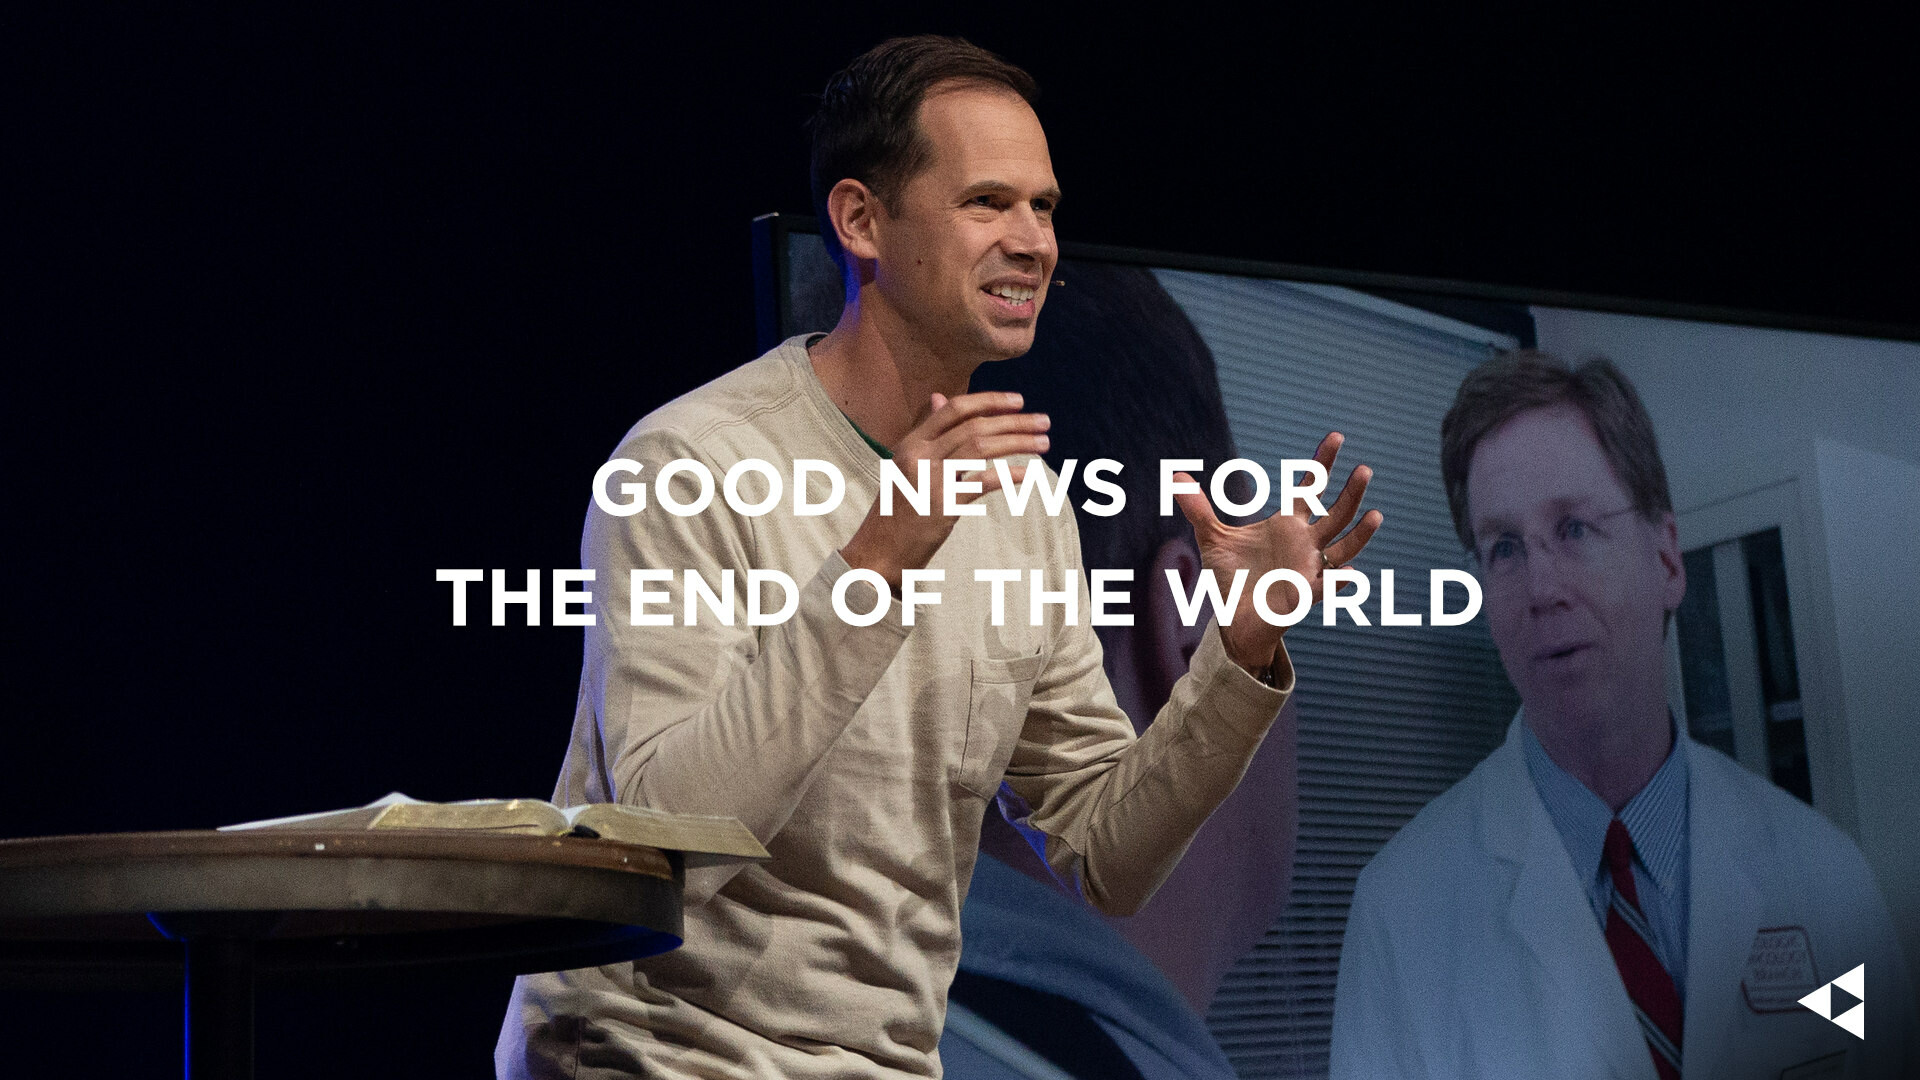 View Message: Good News for the End of the World